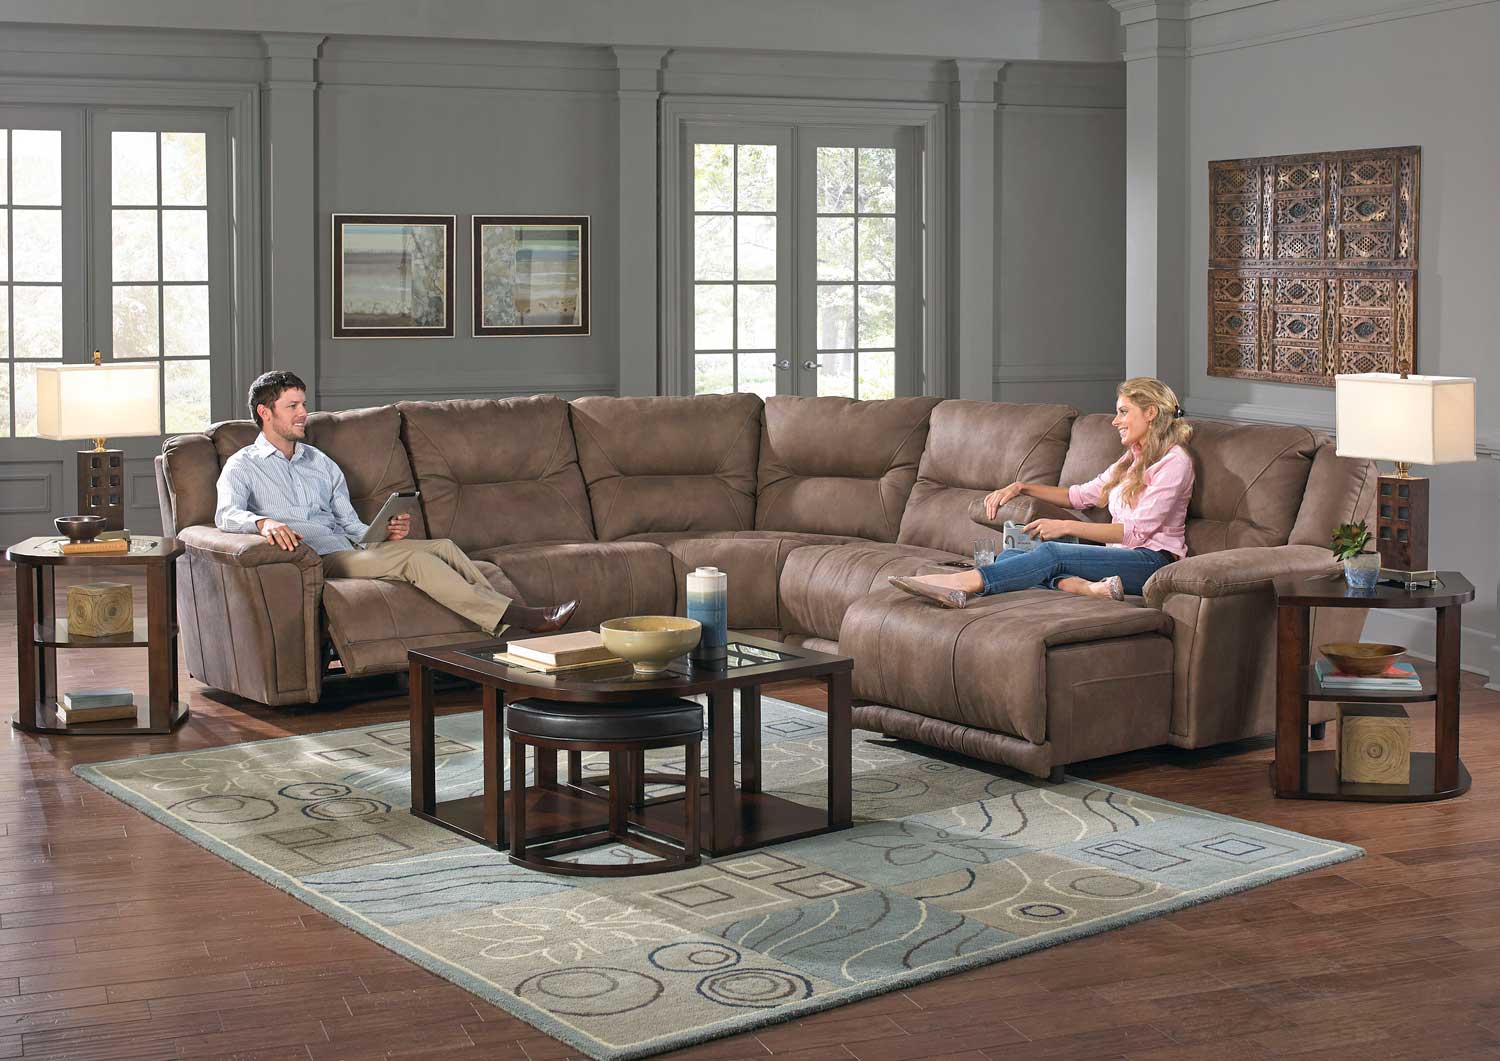 CatNapper Montgomery Sectional Sofa Set 1 - Cement